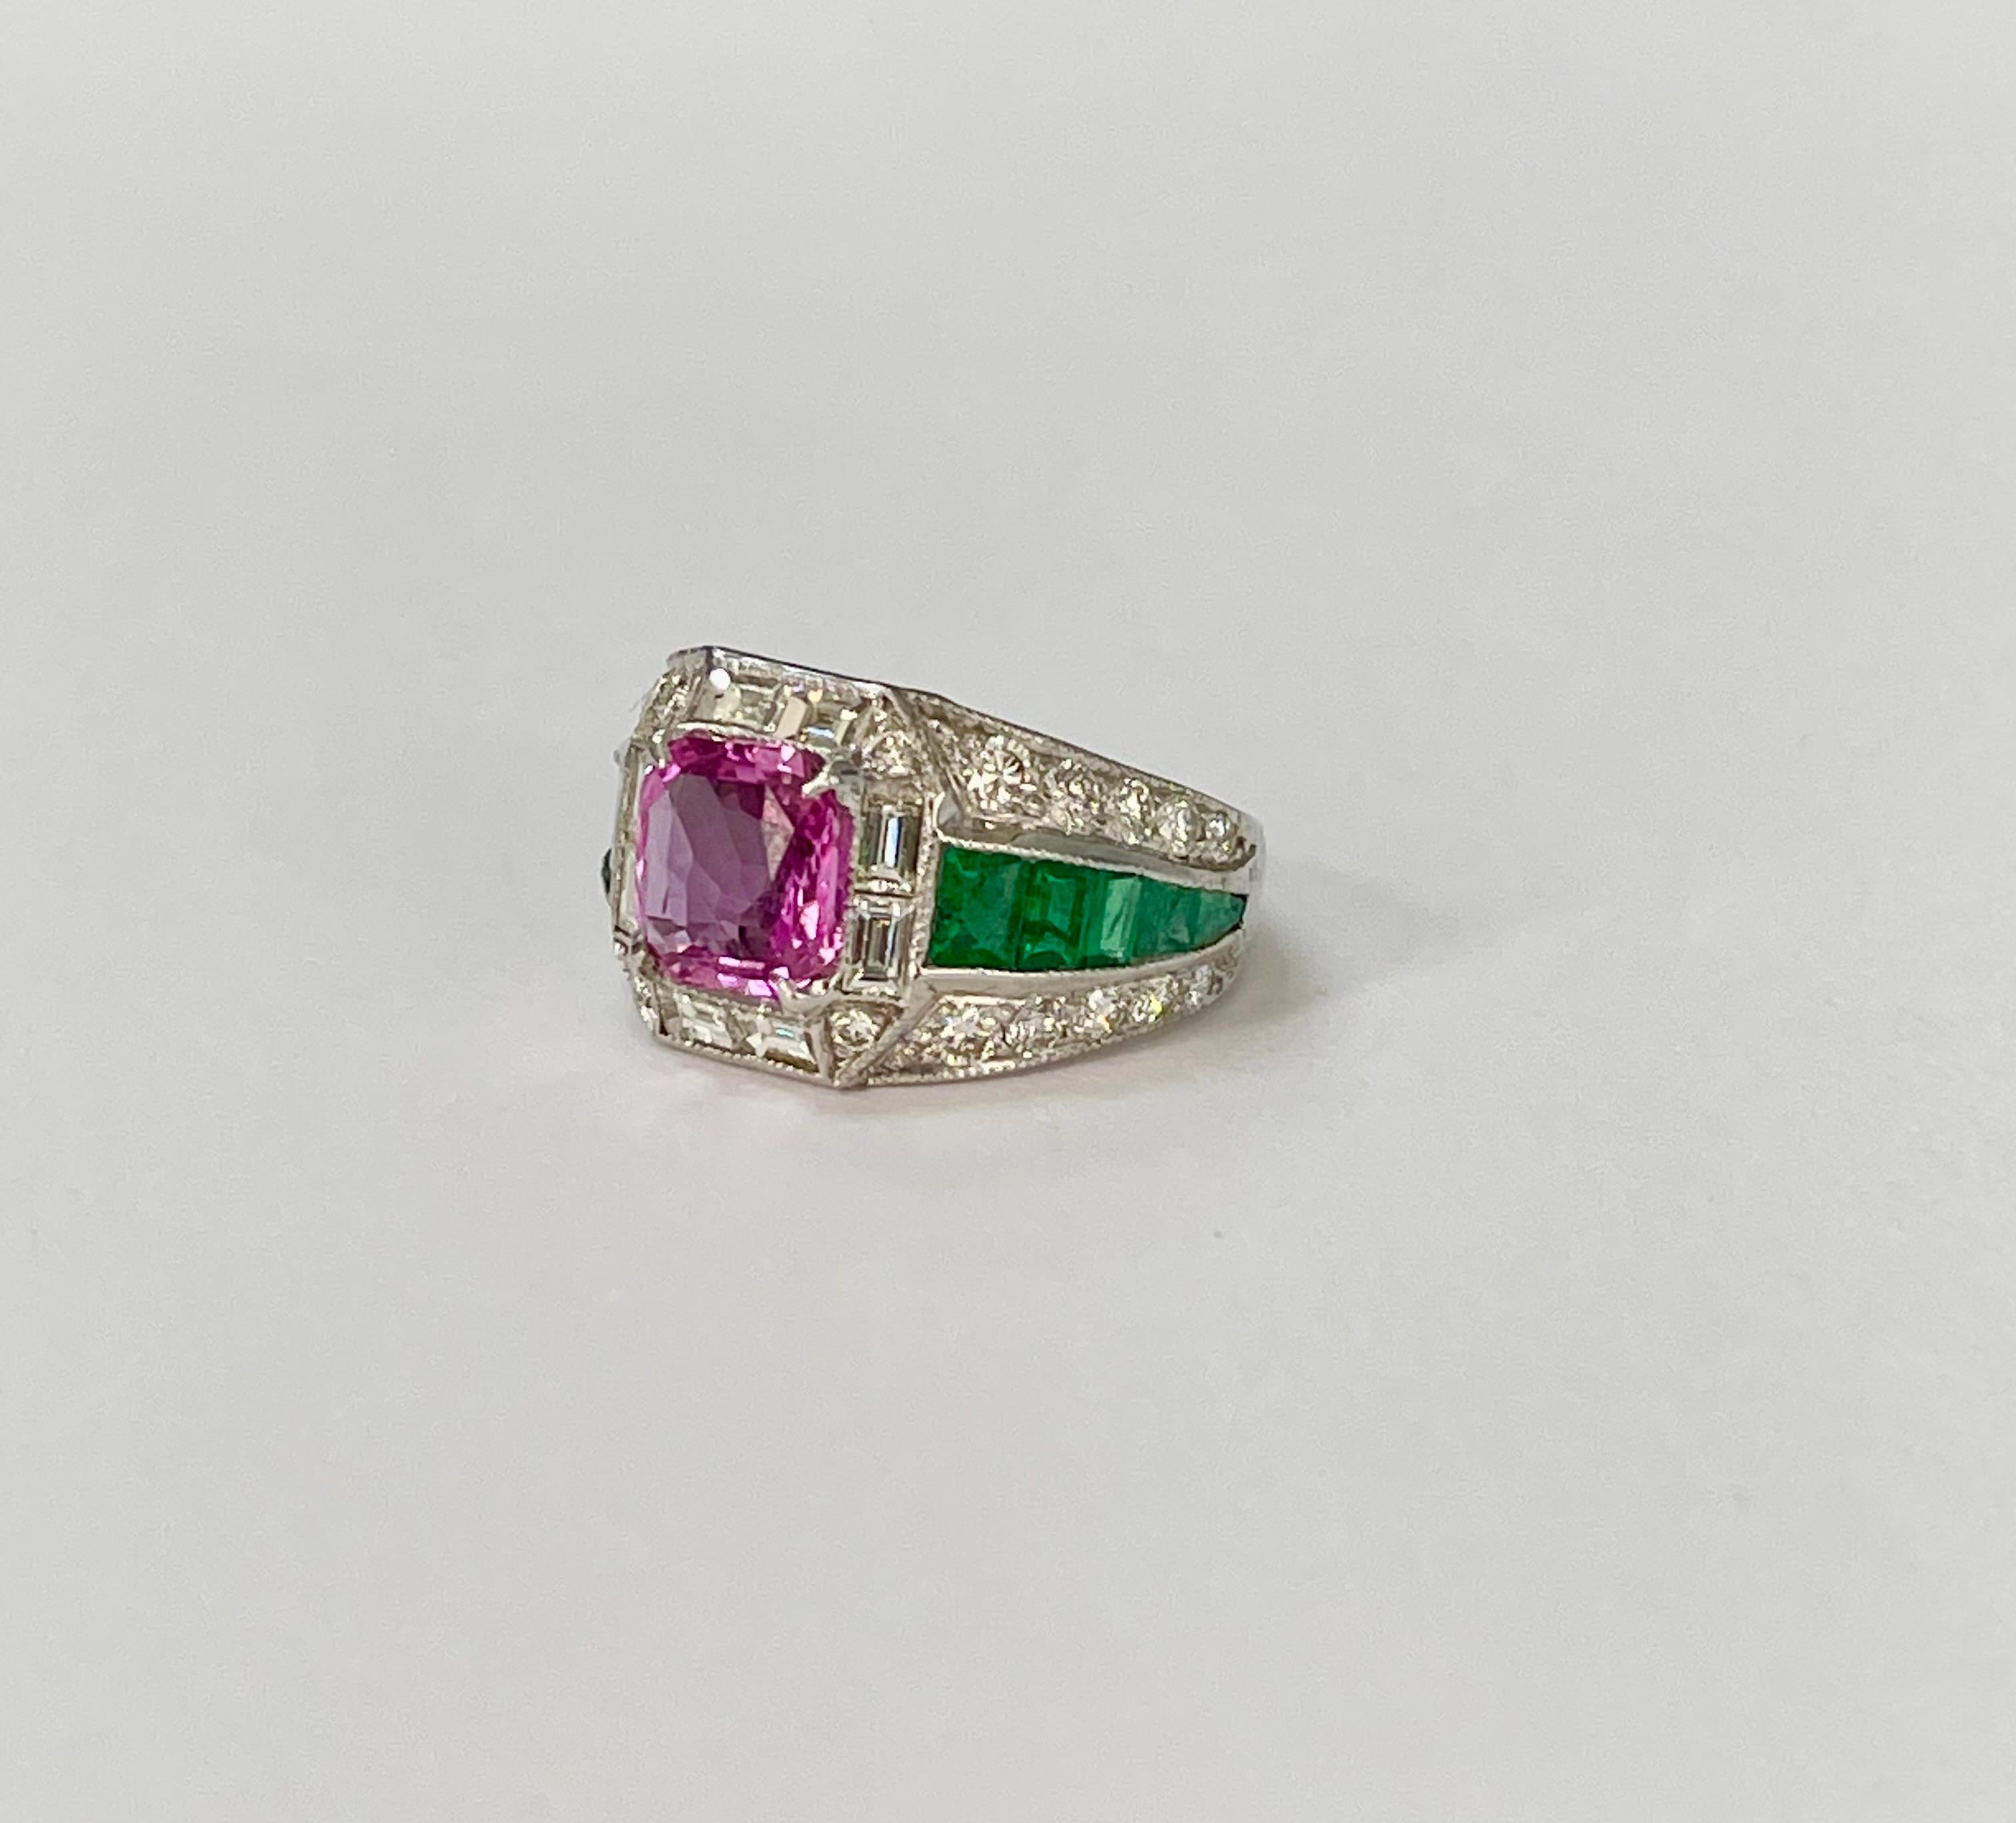 Very pretty hand crafted pink sapphire and emerald engagement ring in 14K white gold. 
The details are as follows : 
Pink Sapphire weight : 2.09 carat 
Emerald weight : 2.05 carat 
Diamond weight : 0.57 carat 
Gold : 6.48 grams 
Metal : 14k